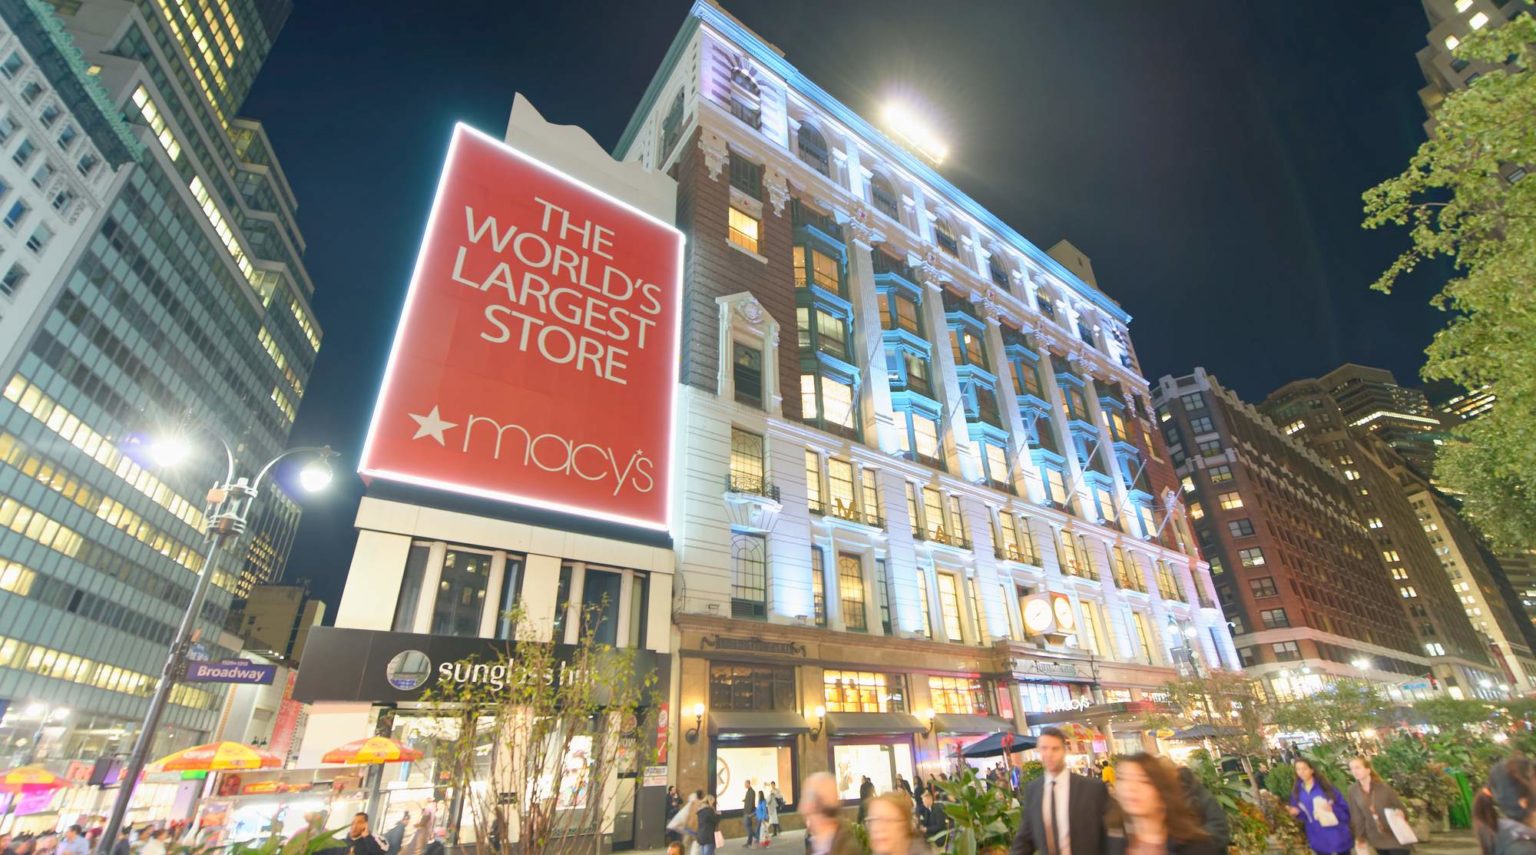 Macy’s to Settle Class Action Over Background Check Policies for 1.8M